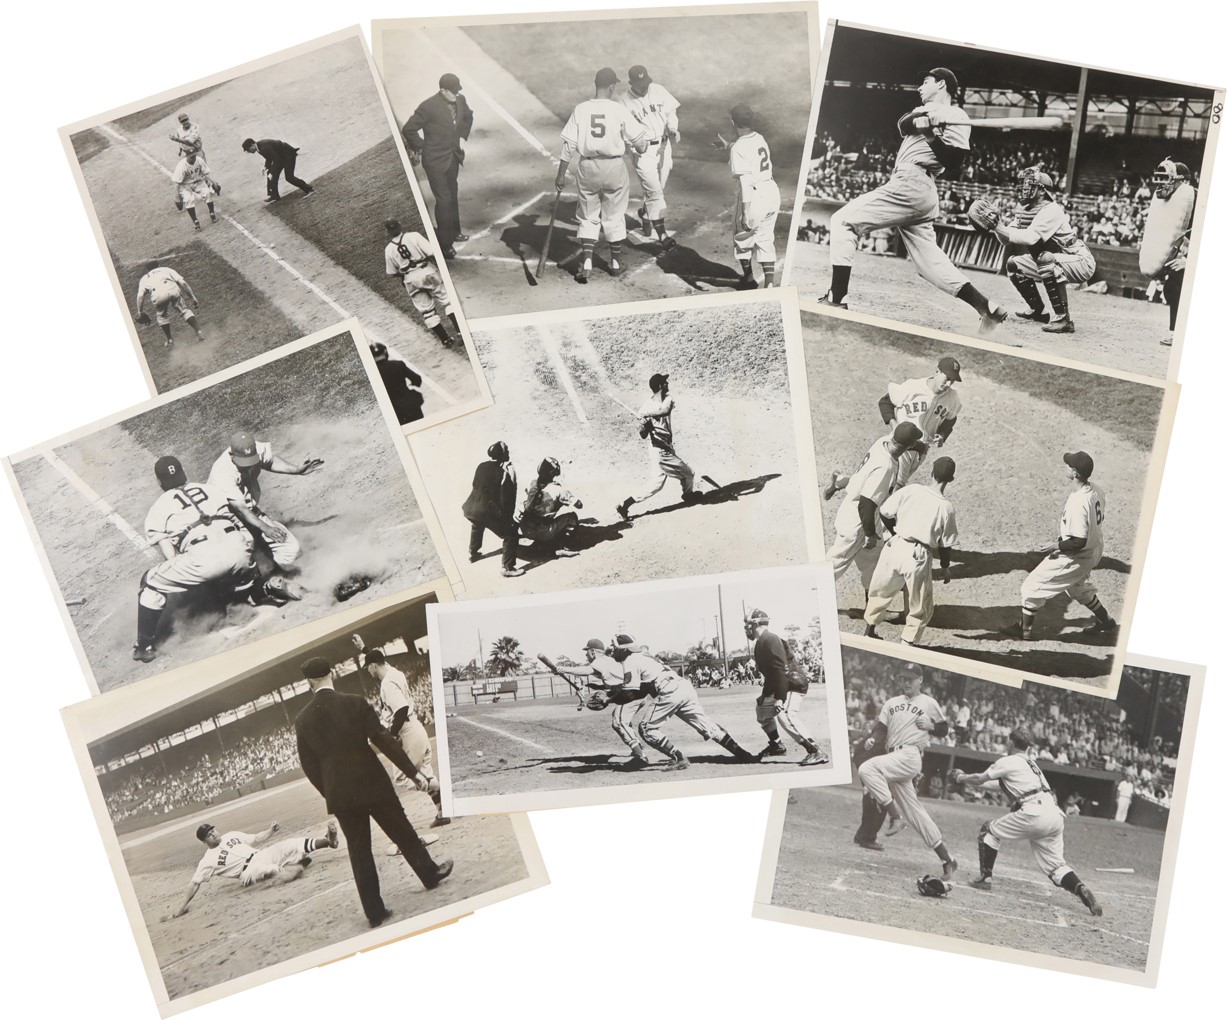 - 1930s-50s Vintage Baseball Type I Action Photograph Archive with Hall of Famers (300+)